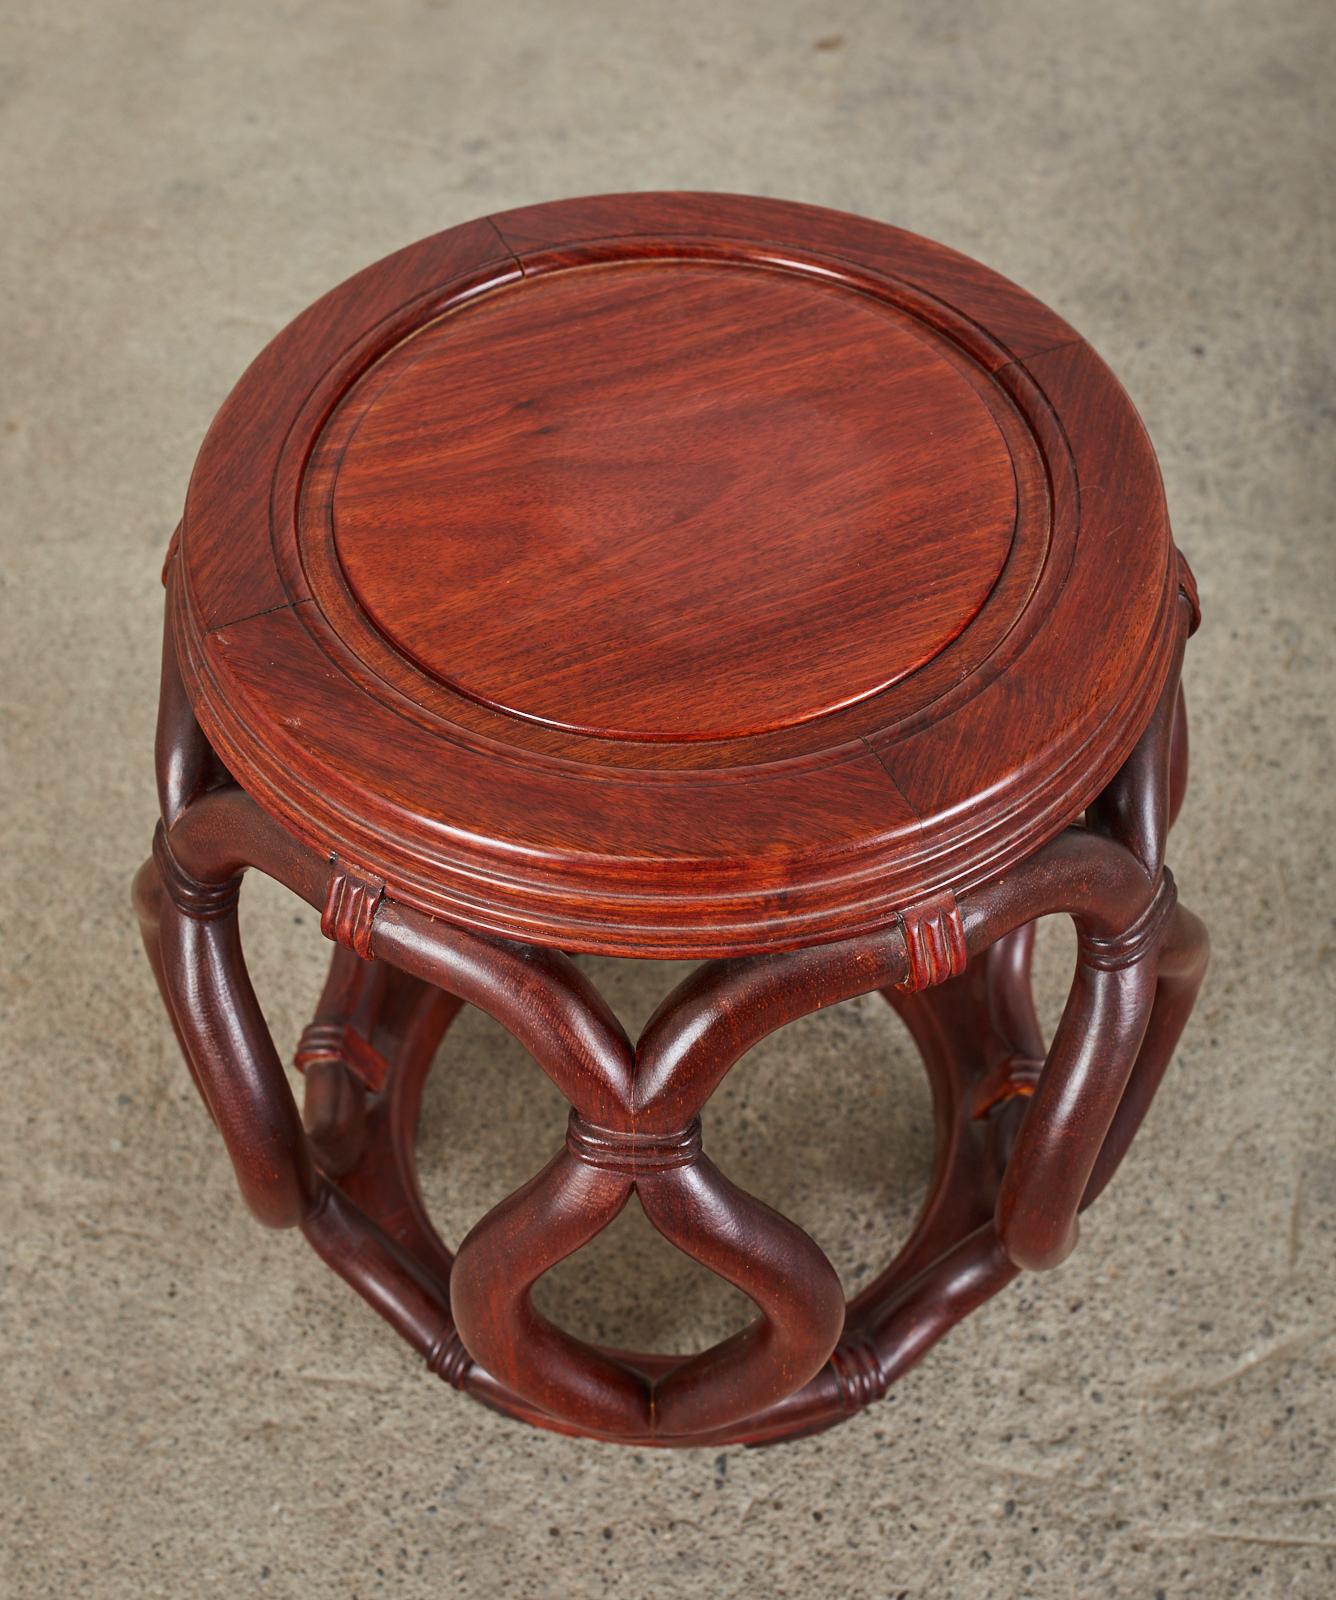 Hand-Crafted Chinese Export Hardwood Garden Stool or Drinks Table